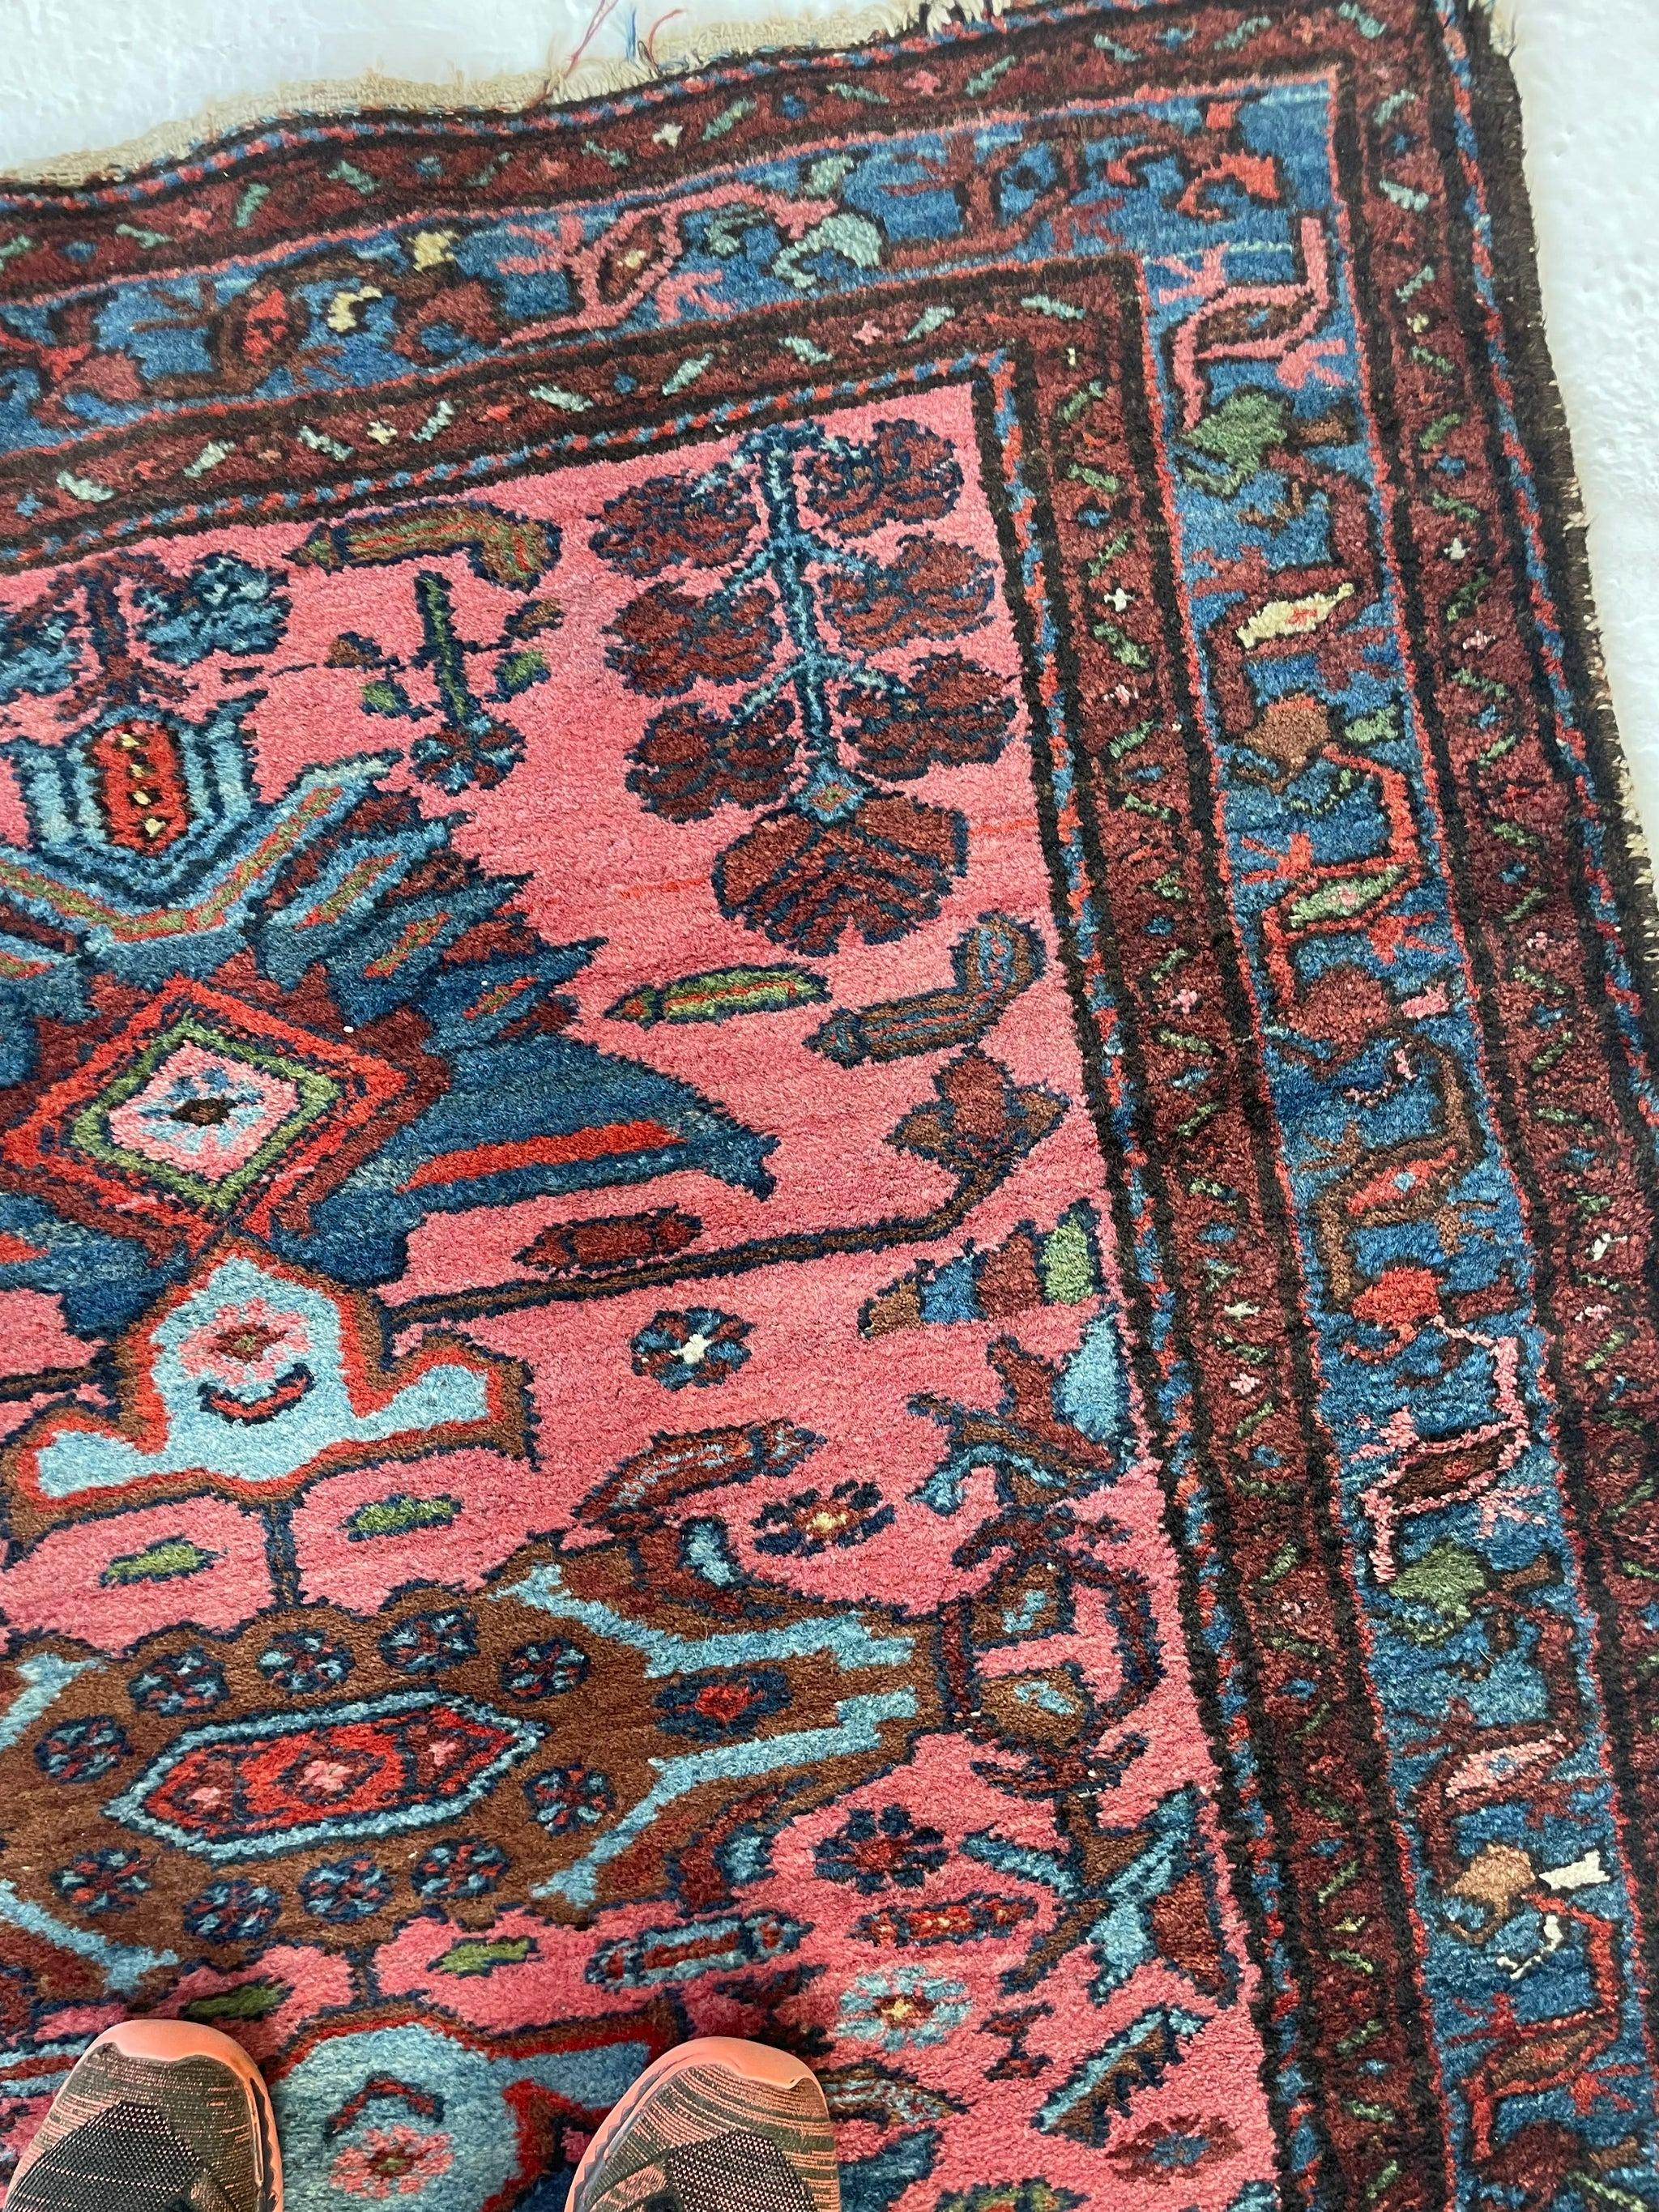 Gorgeous Bubble Gum - Salmon Pink with Ice Blue & Olive Green, Browns, Etc

Size: 3.11 x 6.6
Age: Semi-Antique, C. 1940
Pile: Low / Medium plush pile in nearly mint condition

This rug is one-of-a-kind, only one in the world, no others are